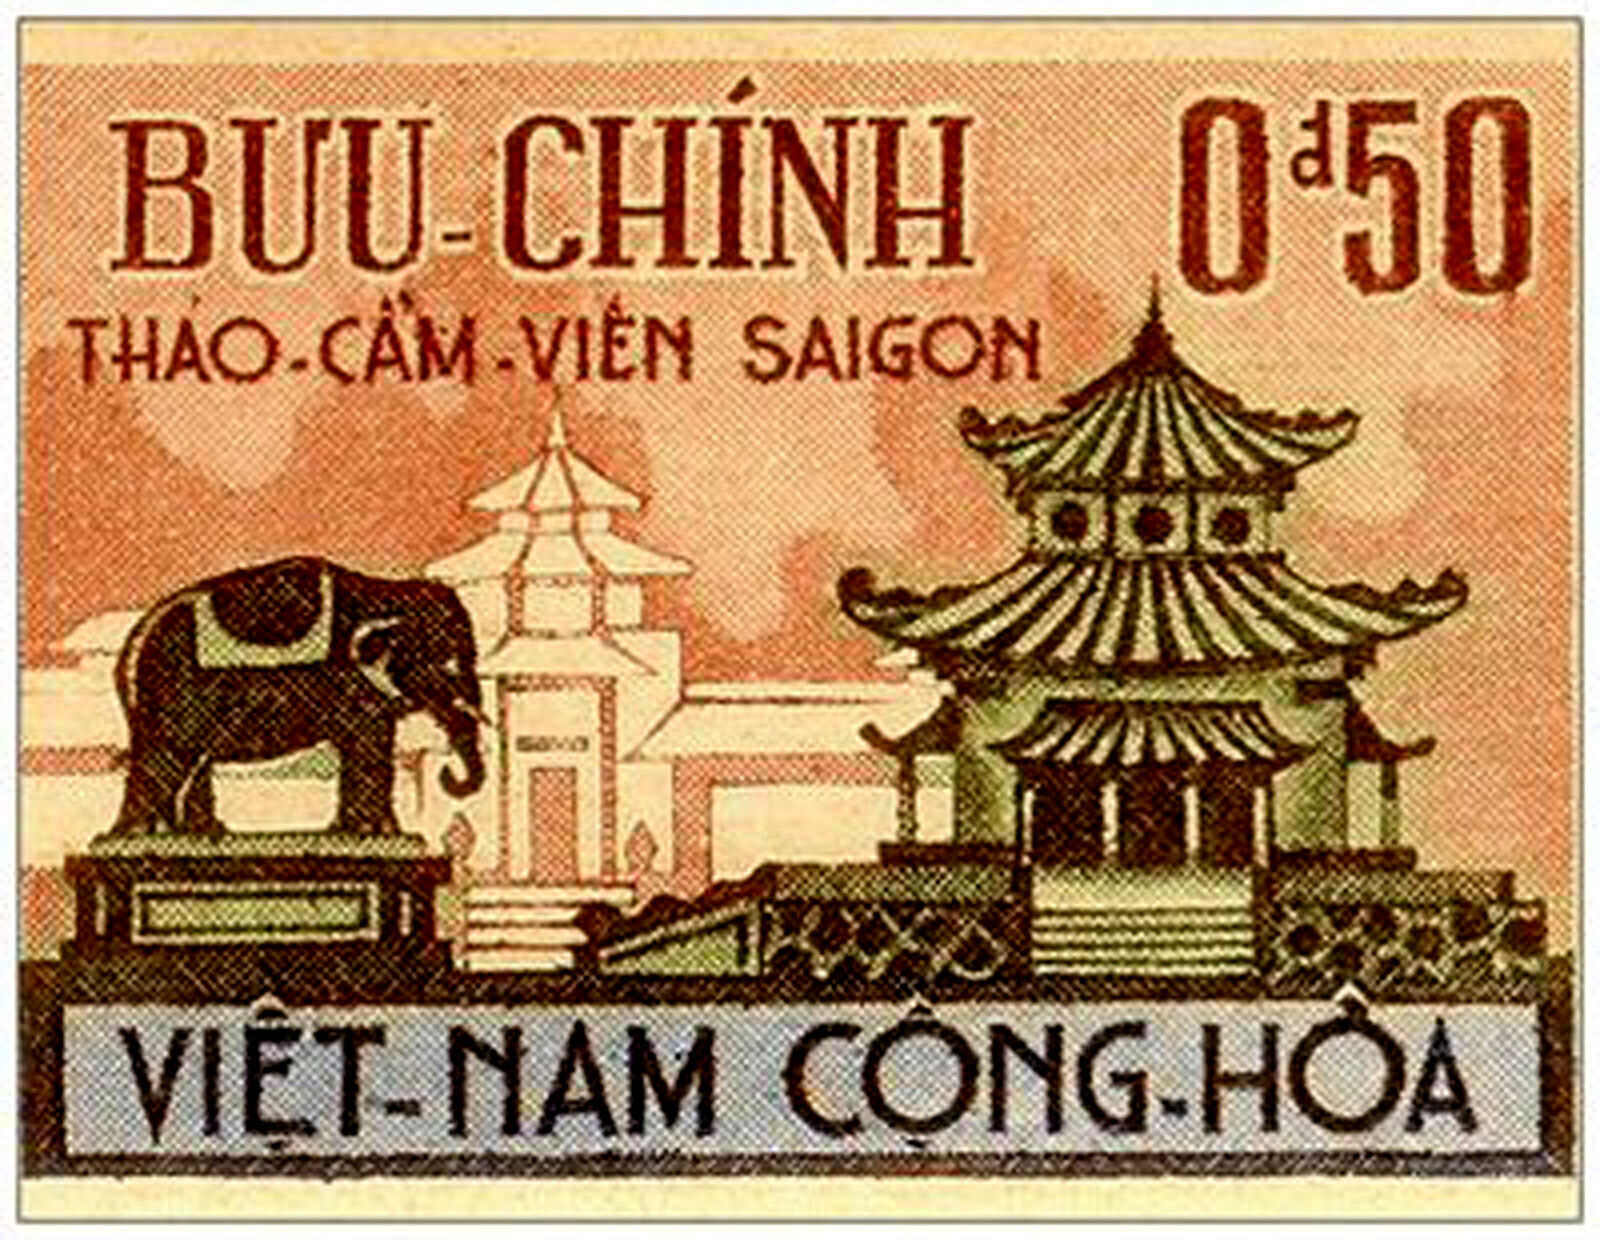 SOUTH VIETNAM (VNCH). SAIGON - The Zoo. Collection Postcard. New. Unused. VNCH 7